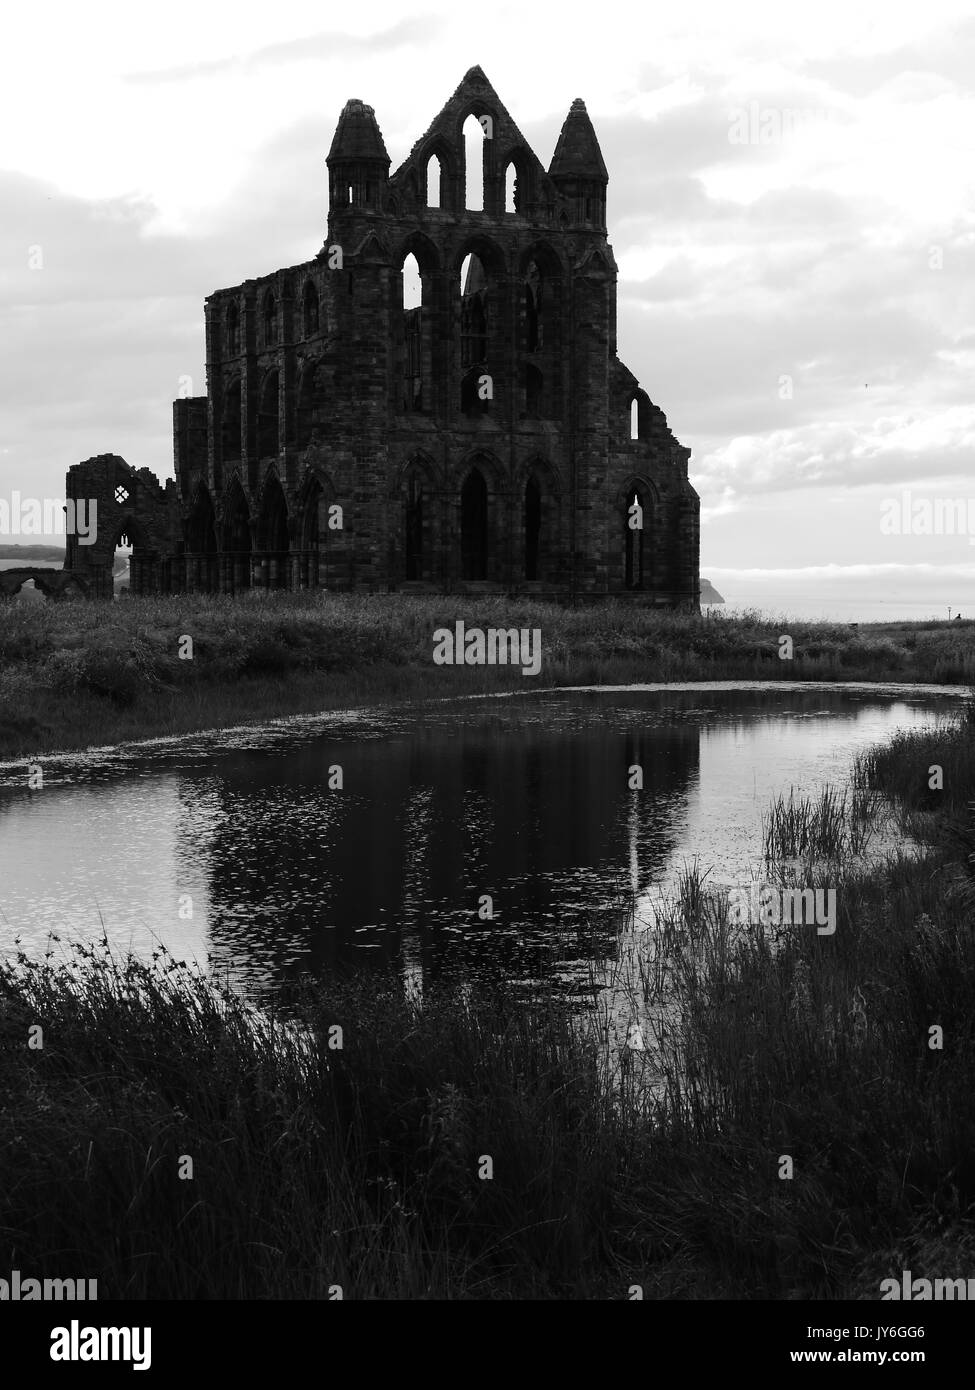 Whitby st Black and White Stock Photos & Images - Alamy